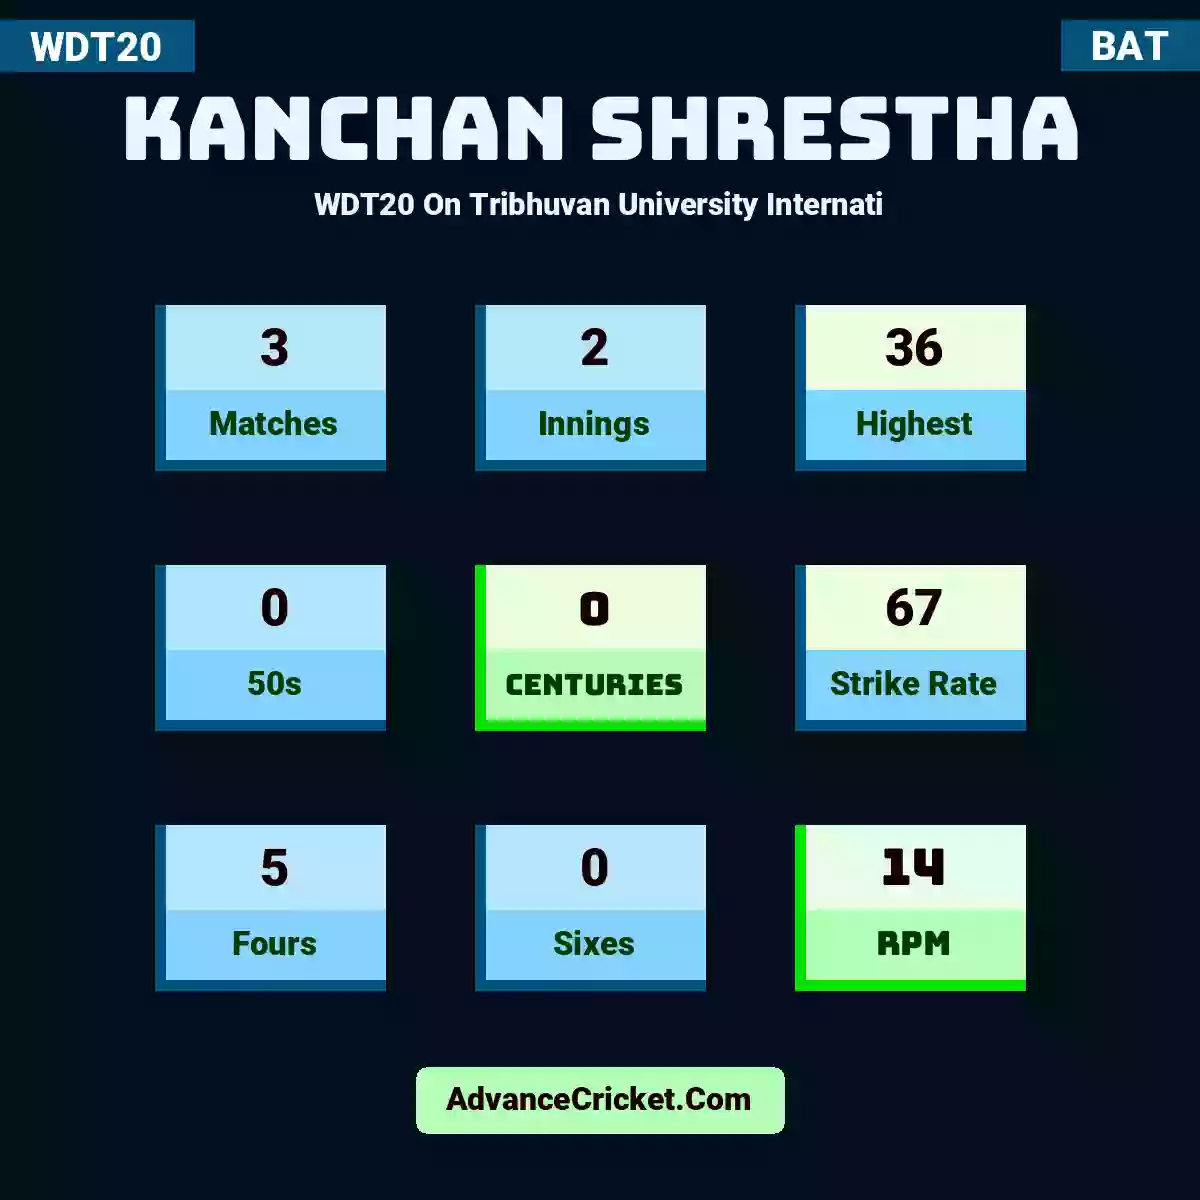 Kanchan Shrestha WDT20  On Tribhuvan University Internati, Kanchan Shrestha played 3 matches, scored 36 runs as highest, 0 half-centuries, and 0 centuries, with a strike rate of 67. K.Shrestha hit 5 fours and 0 sixes, with an RPM of 14.